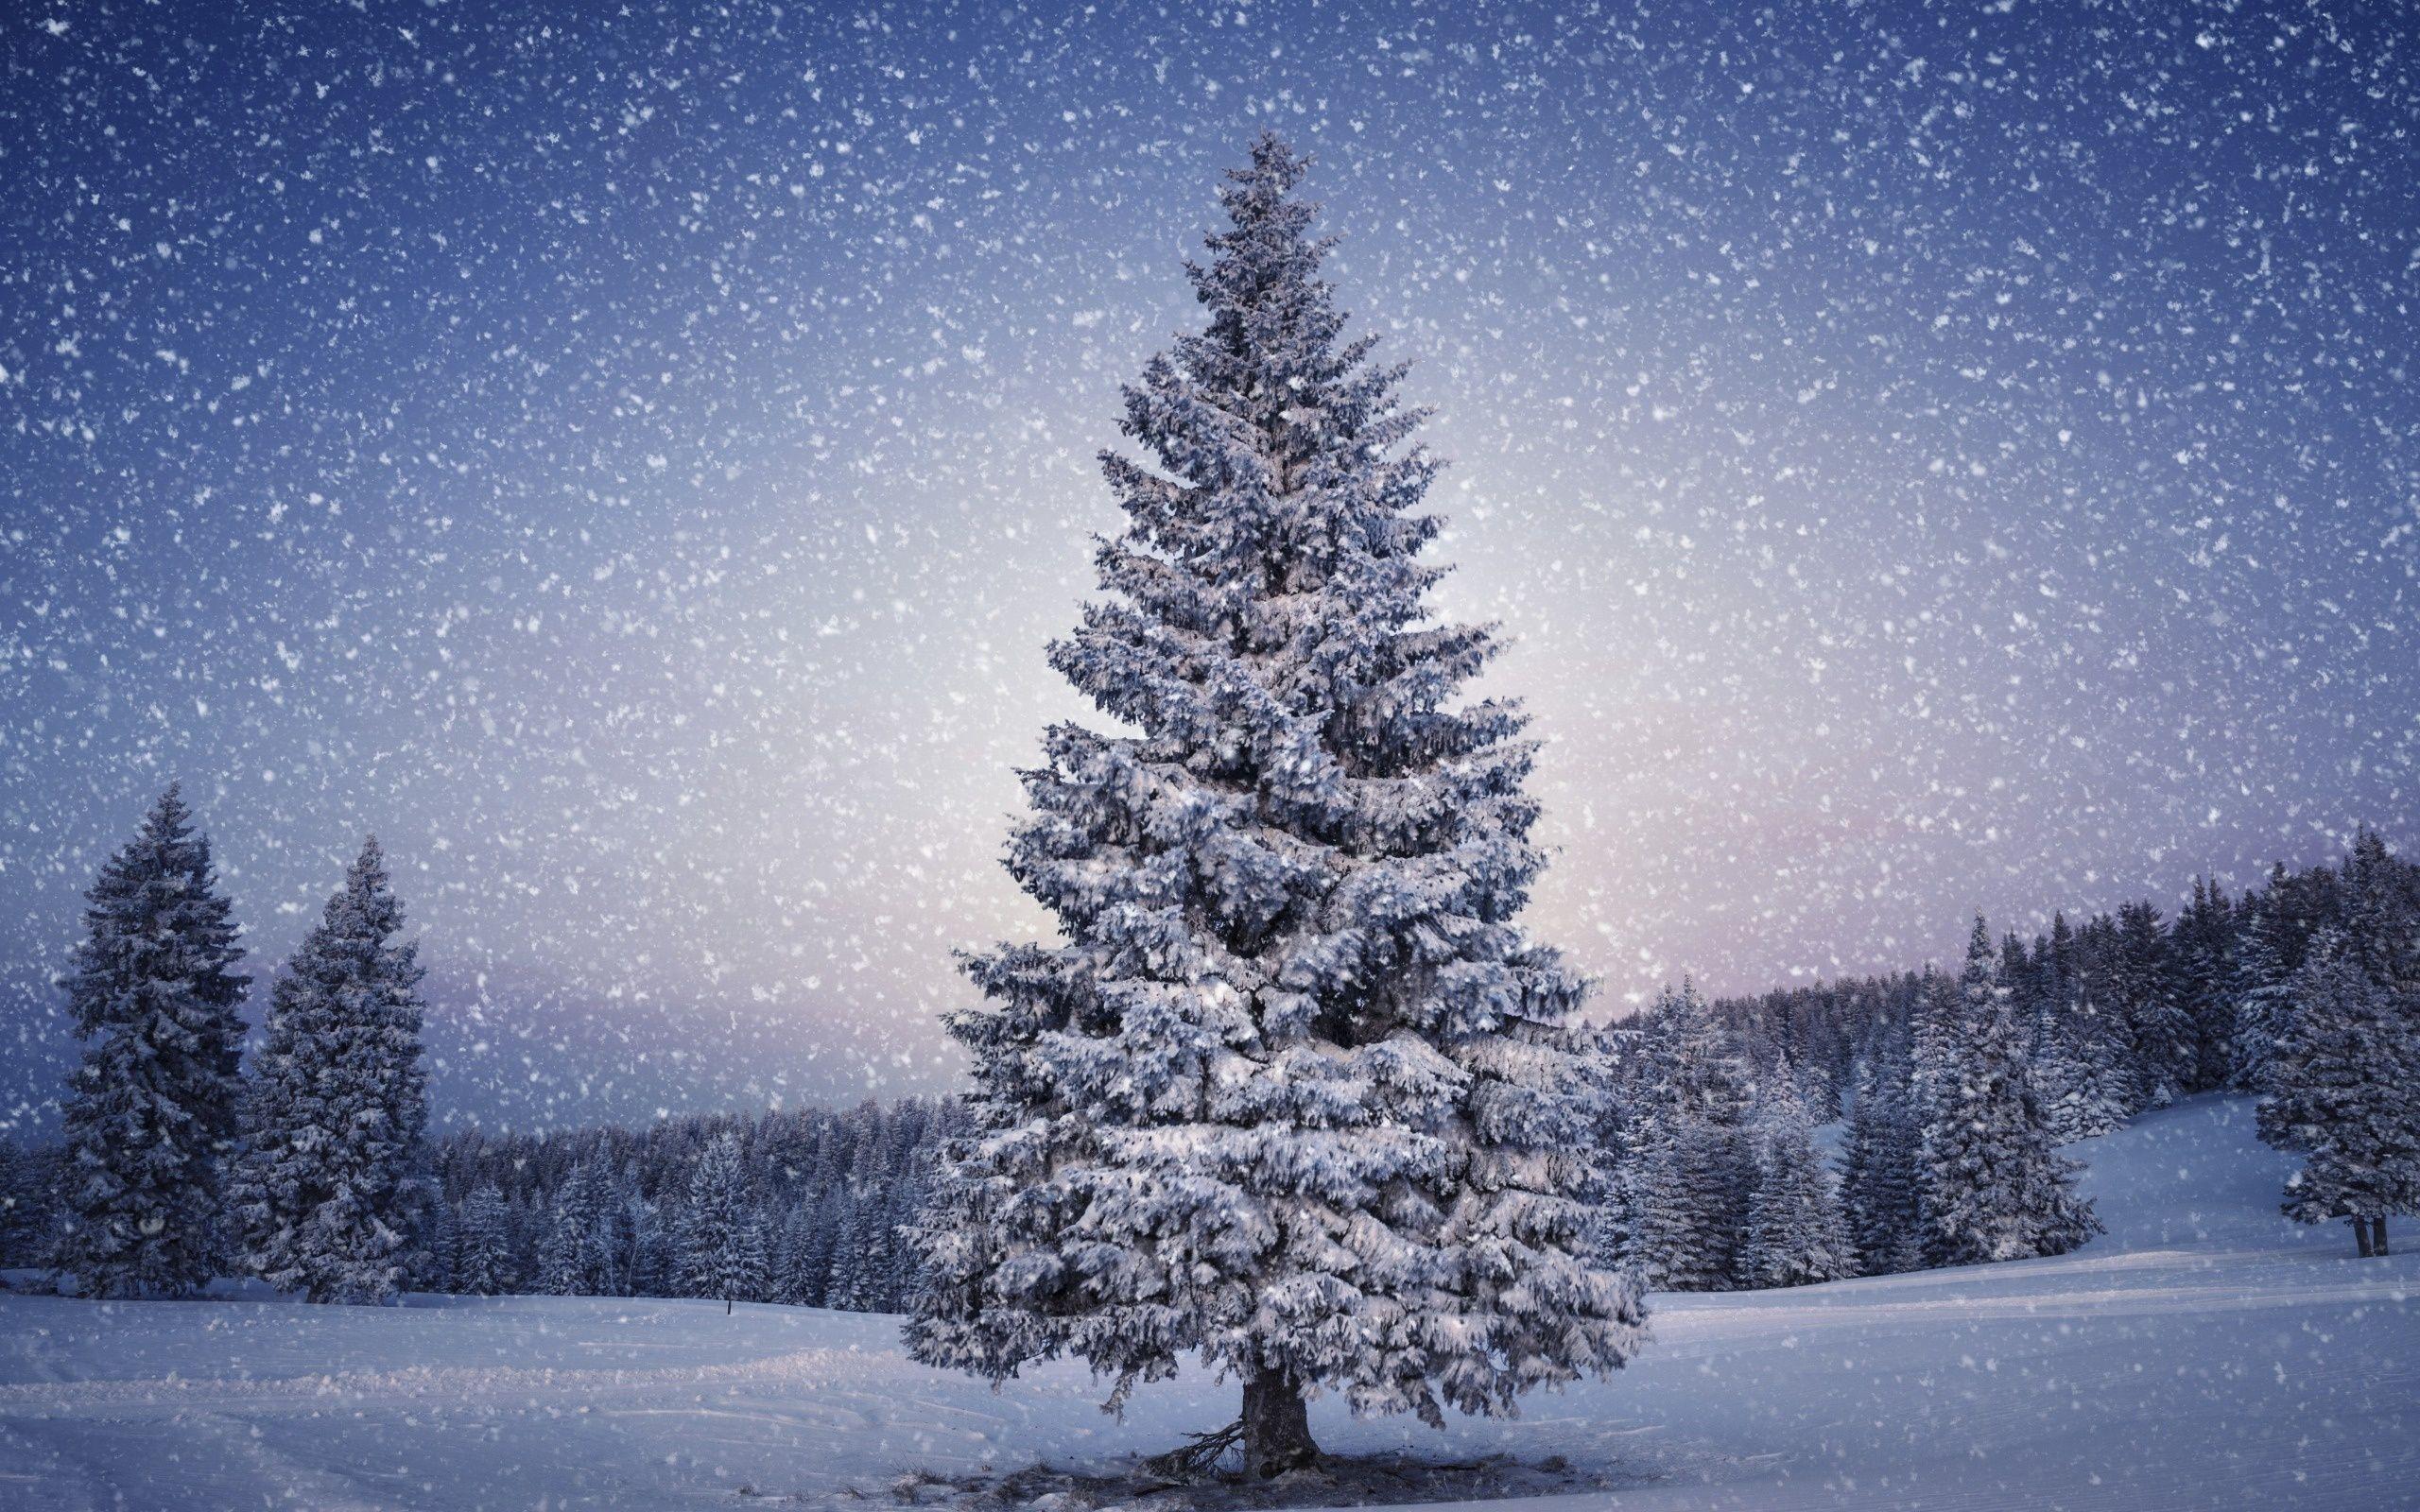 Beautiful Snow Wallpapers Image Of Christmas Trees.